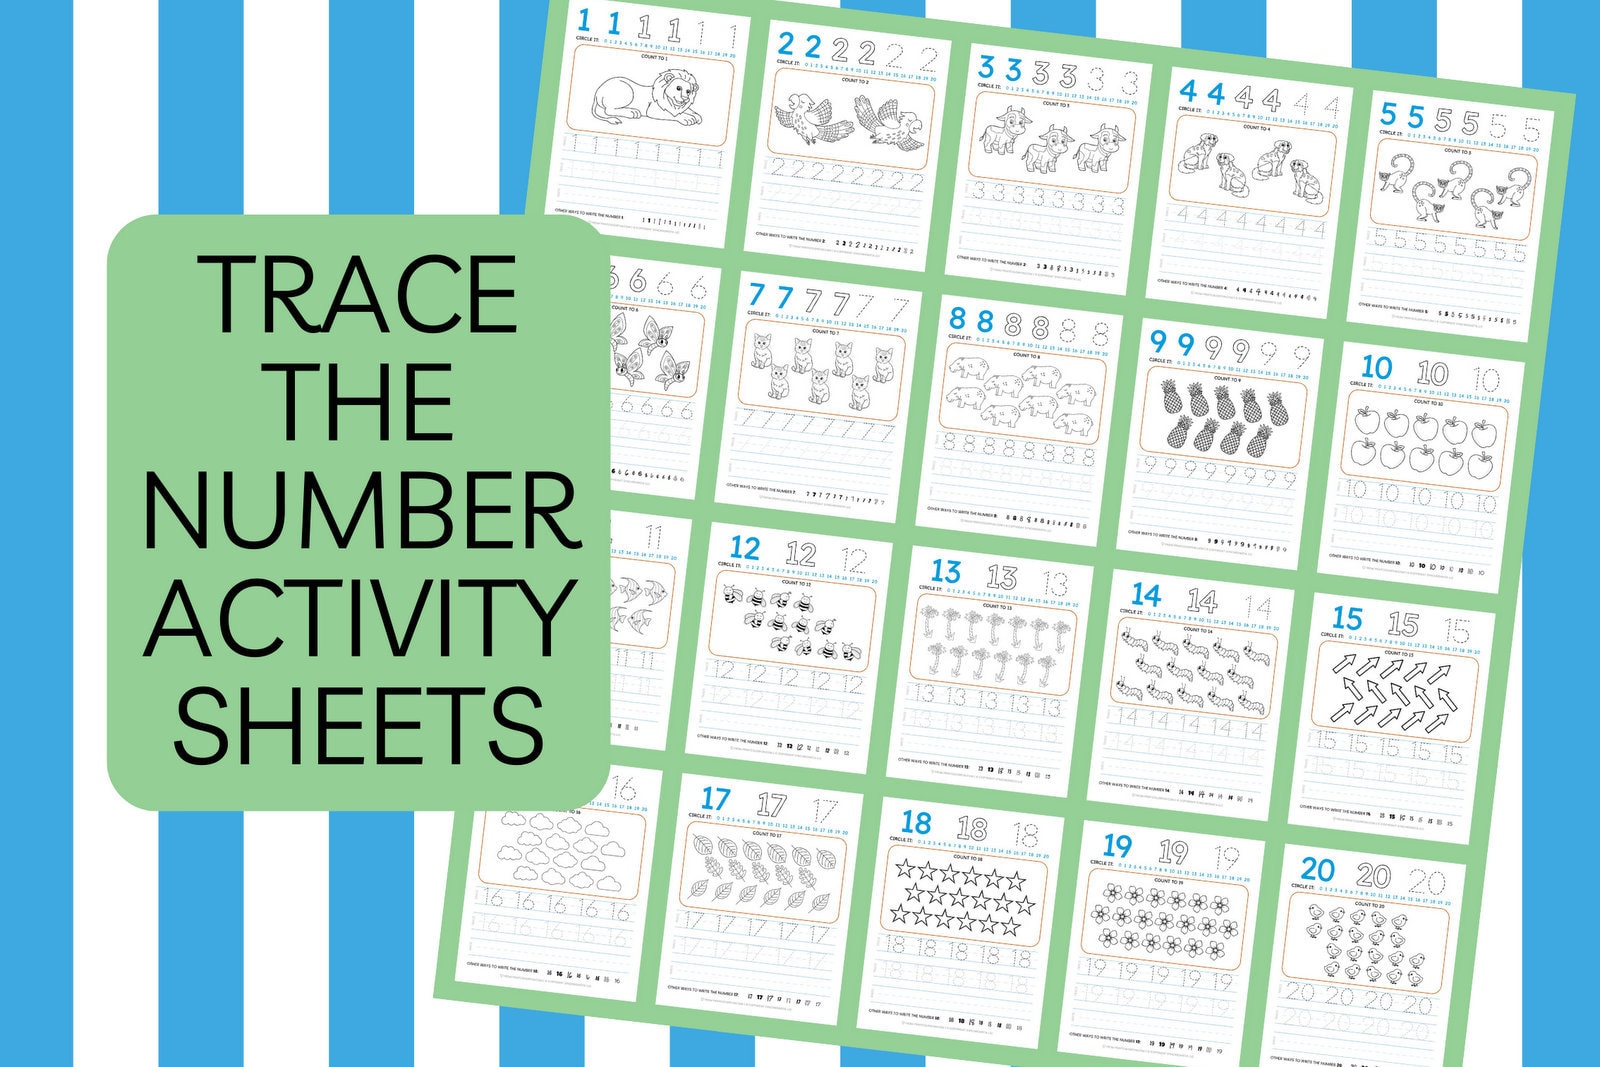 Tracing the number printable activity sheets 1 to 20 at PrintColorFun com